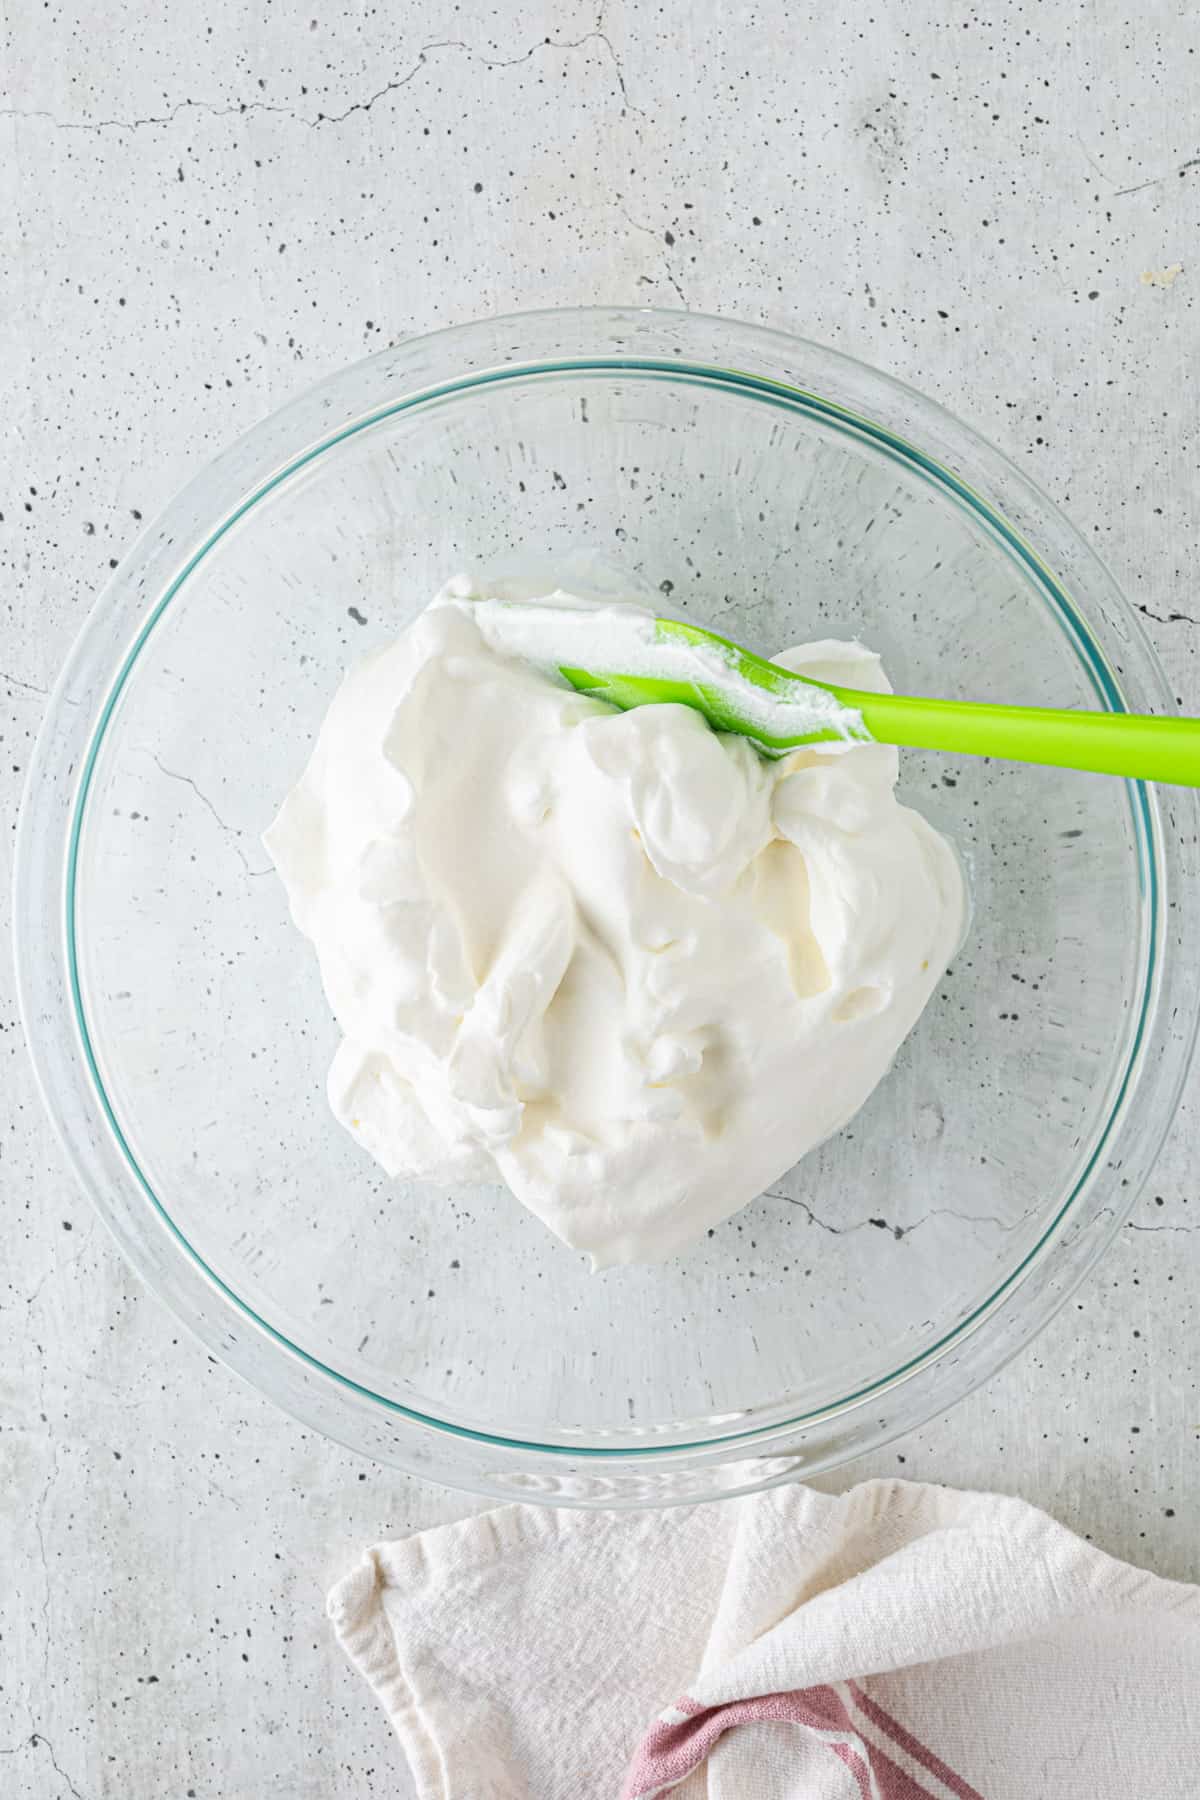 Whipped cream in a large bowl with a rubber spatula.